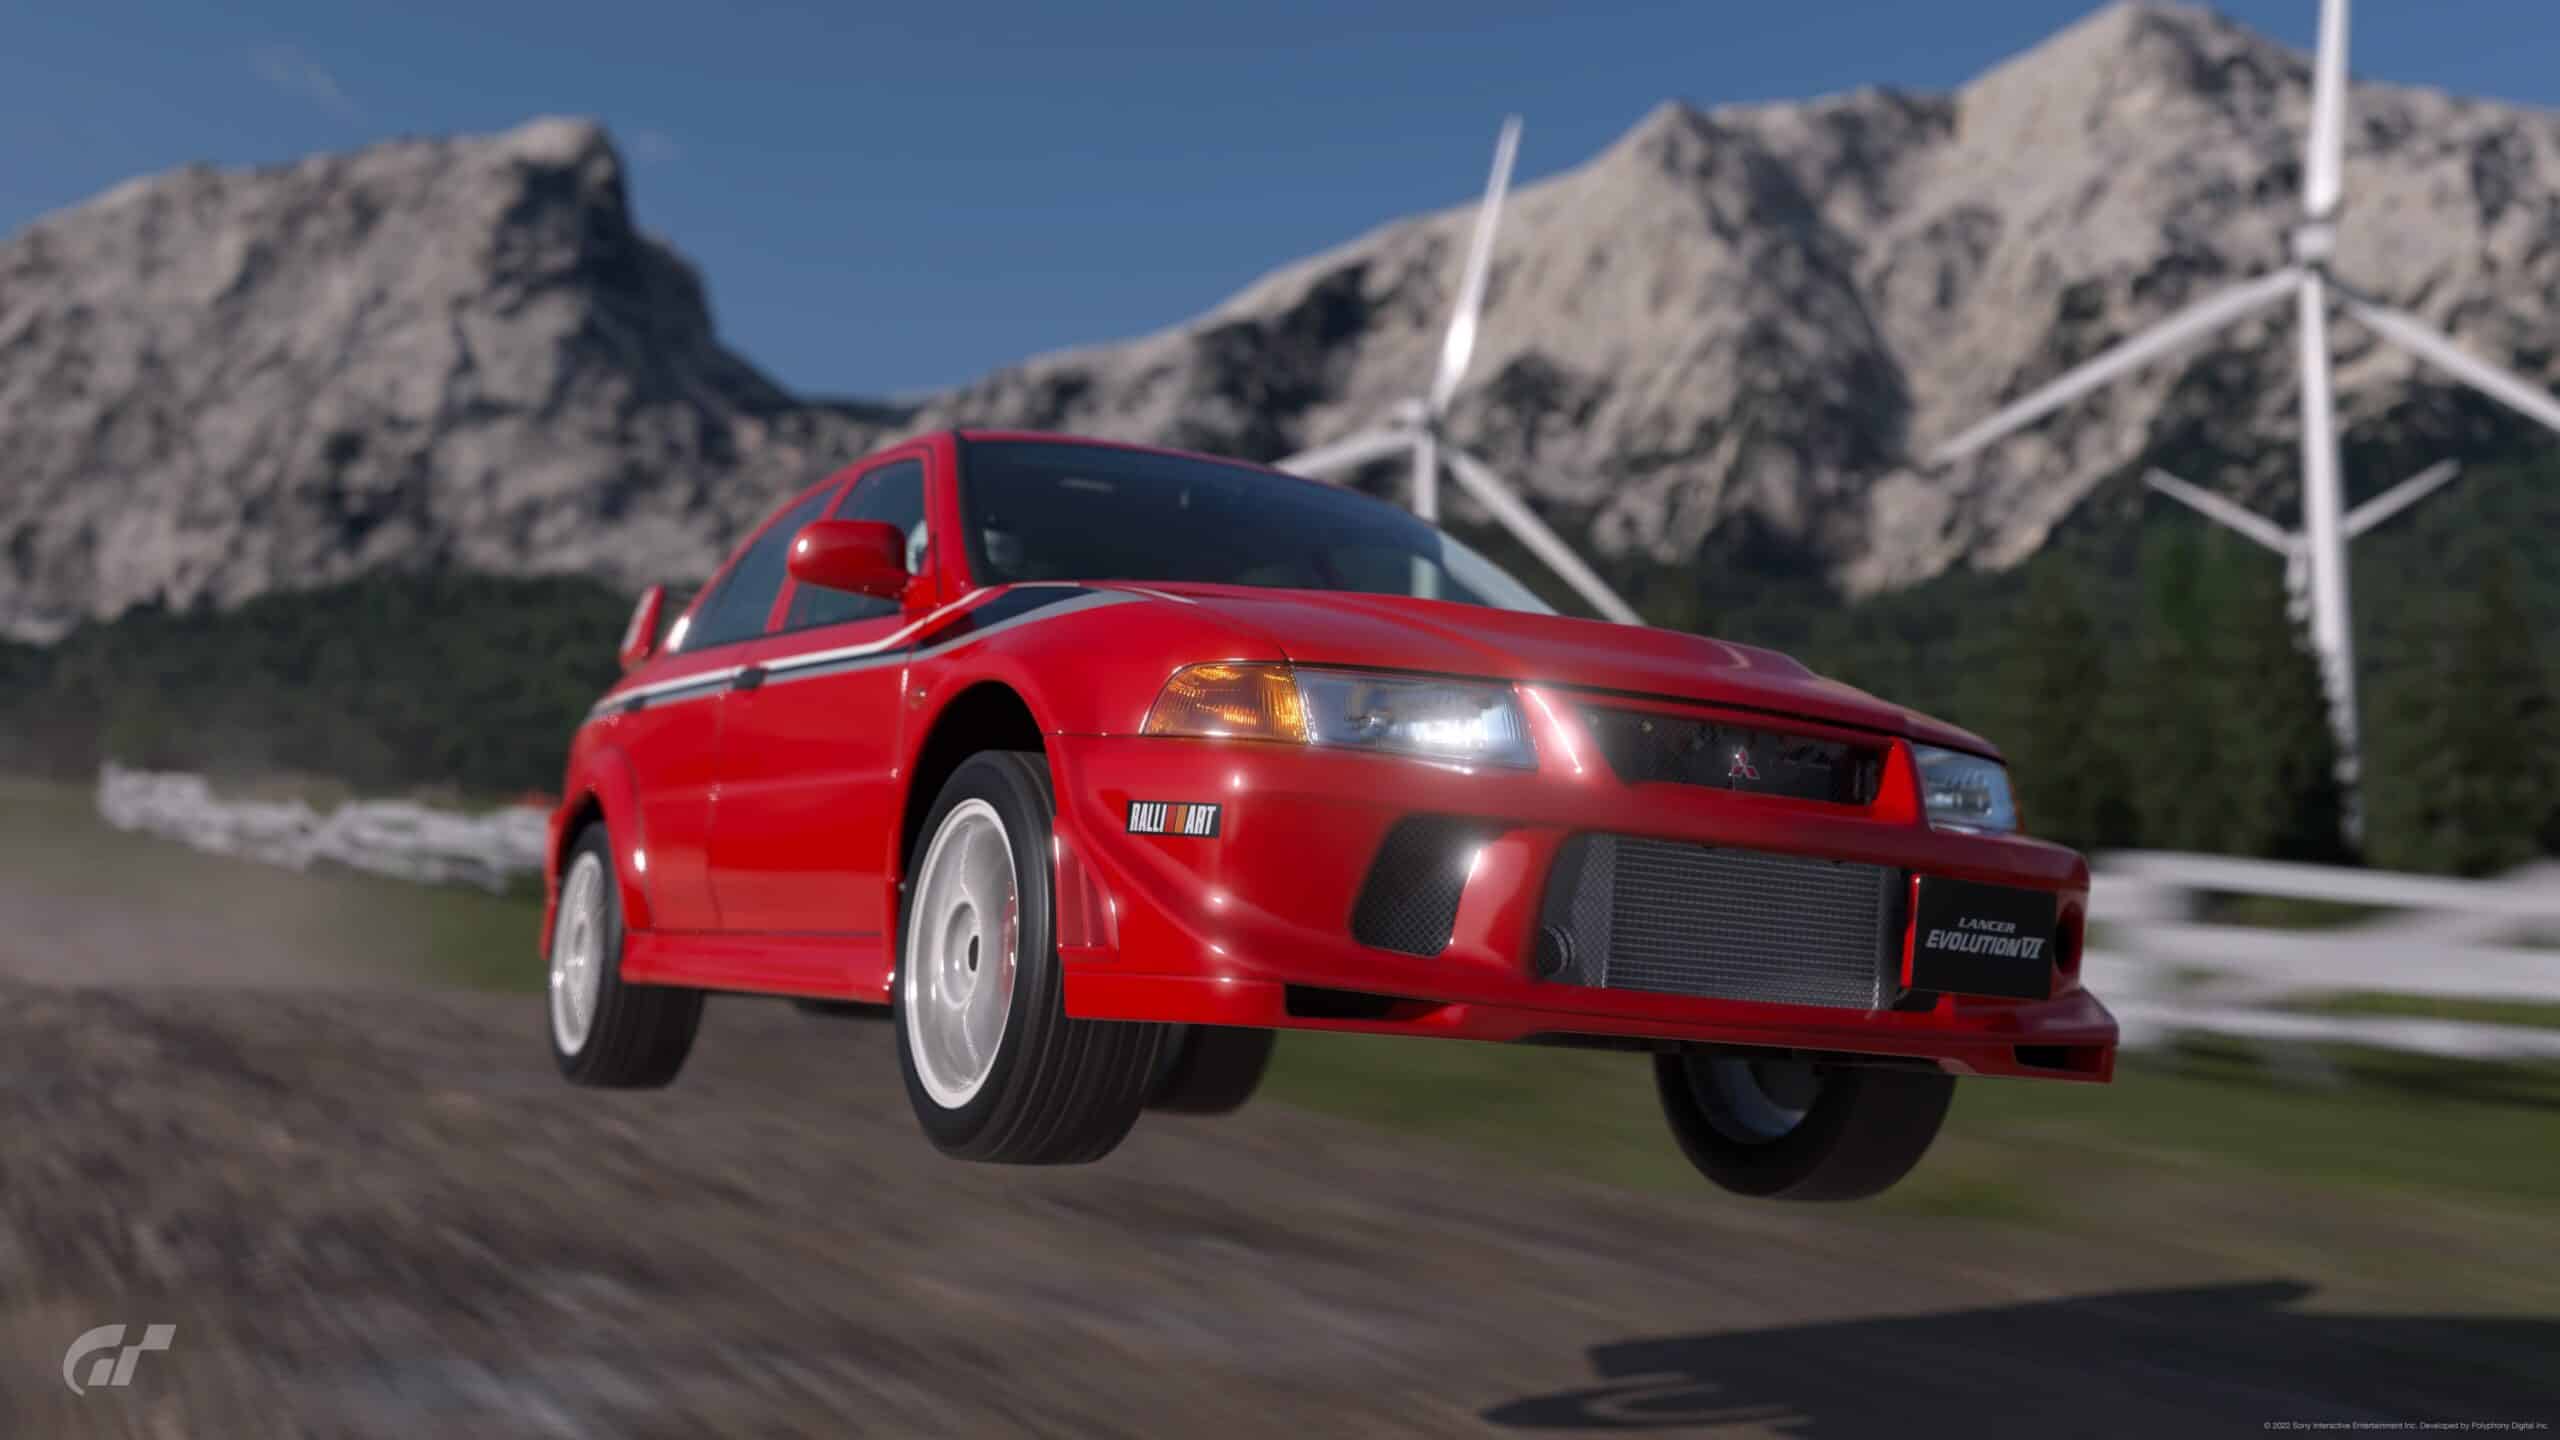 Here's how much real money Gran Turismo 7 Credit Bundles cost